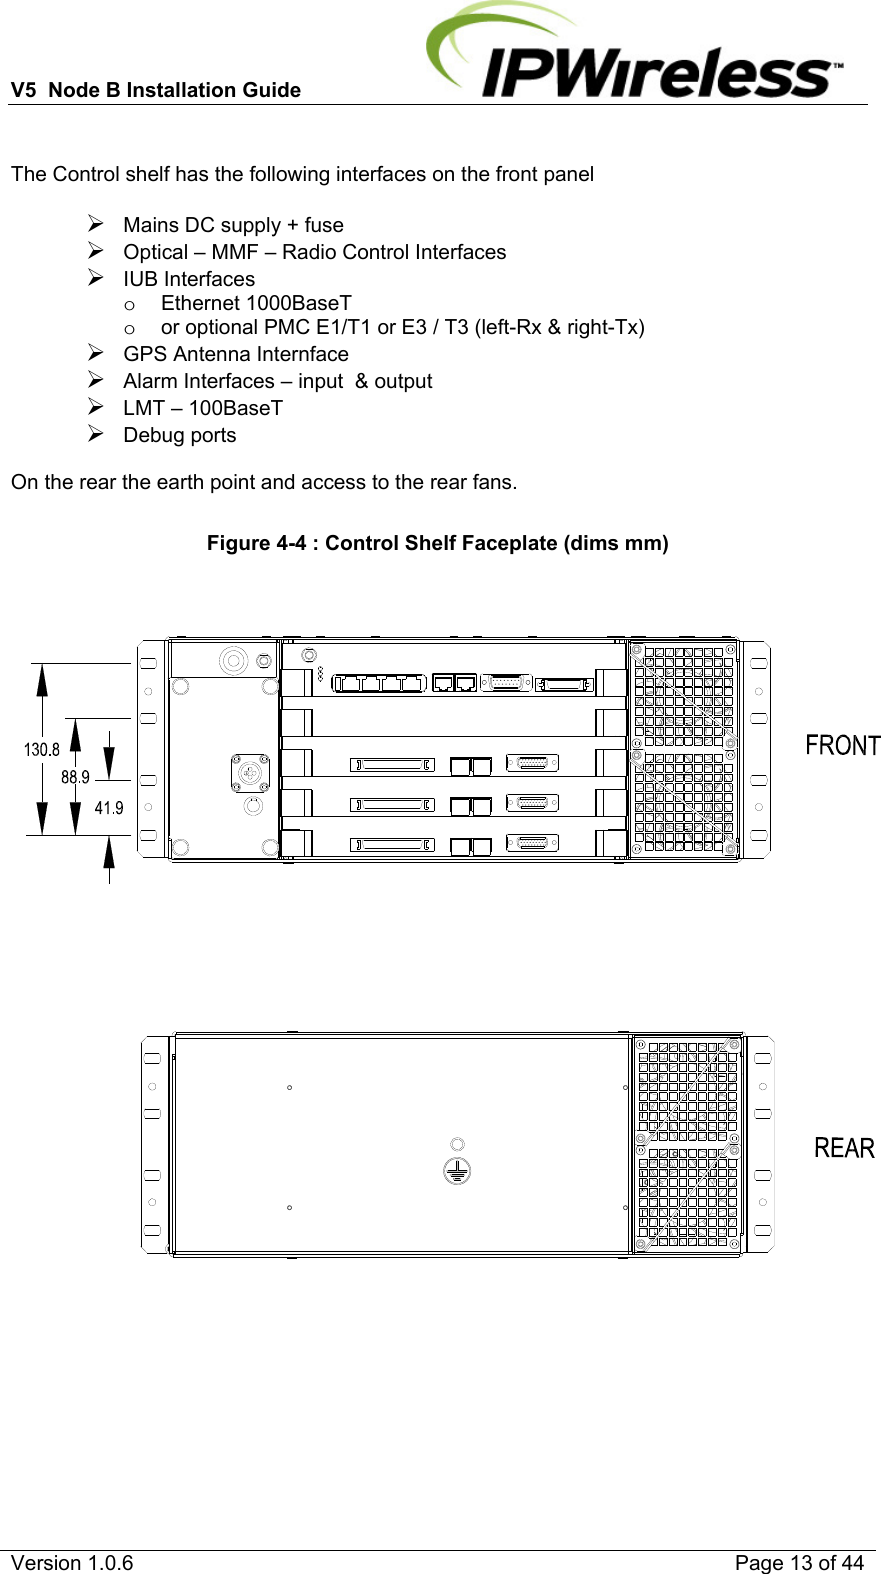 V5  Node B Installation Guide                           Version 1.0.6    Page 13 of 44  The Control shelf has the following interfaces on the front panel  ¾ Mains DC supply + fuse ¾ Optical – MMF – Radio Control Interfaces ¾ IUB Interfaces  o Ethernet 1000BaseT o  or optional PMC E1/T1 or E3 / T3 (left-Rx &amp; right-Tx) ¾ GPS Antenna Internface ¾ Alarm Interfaces – input  &amp; output ¾ LMT – 100BaseT ¾ Debug ports  On the rear the earth point and access to the rear fans.  Figure 4-4 : Control Shelf Faceplate (dims mm) 